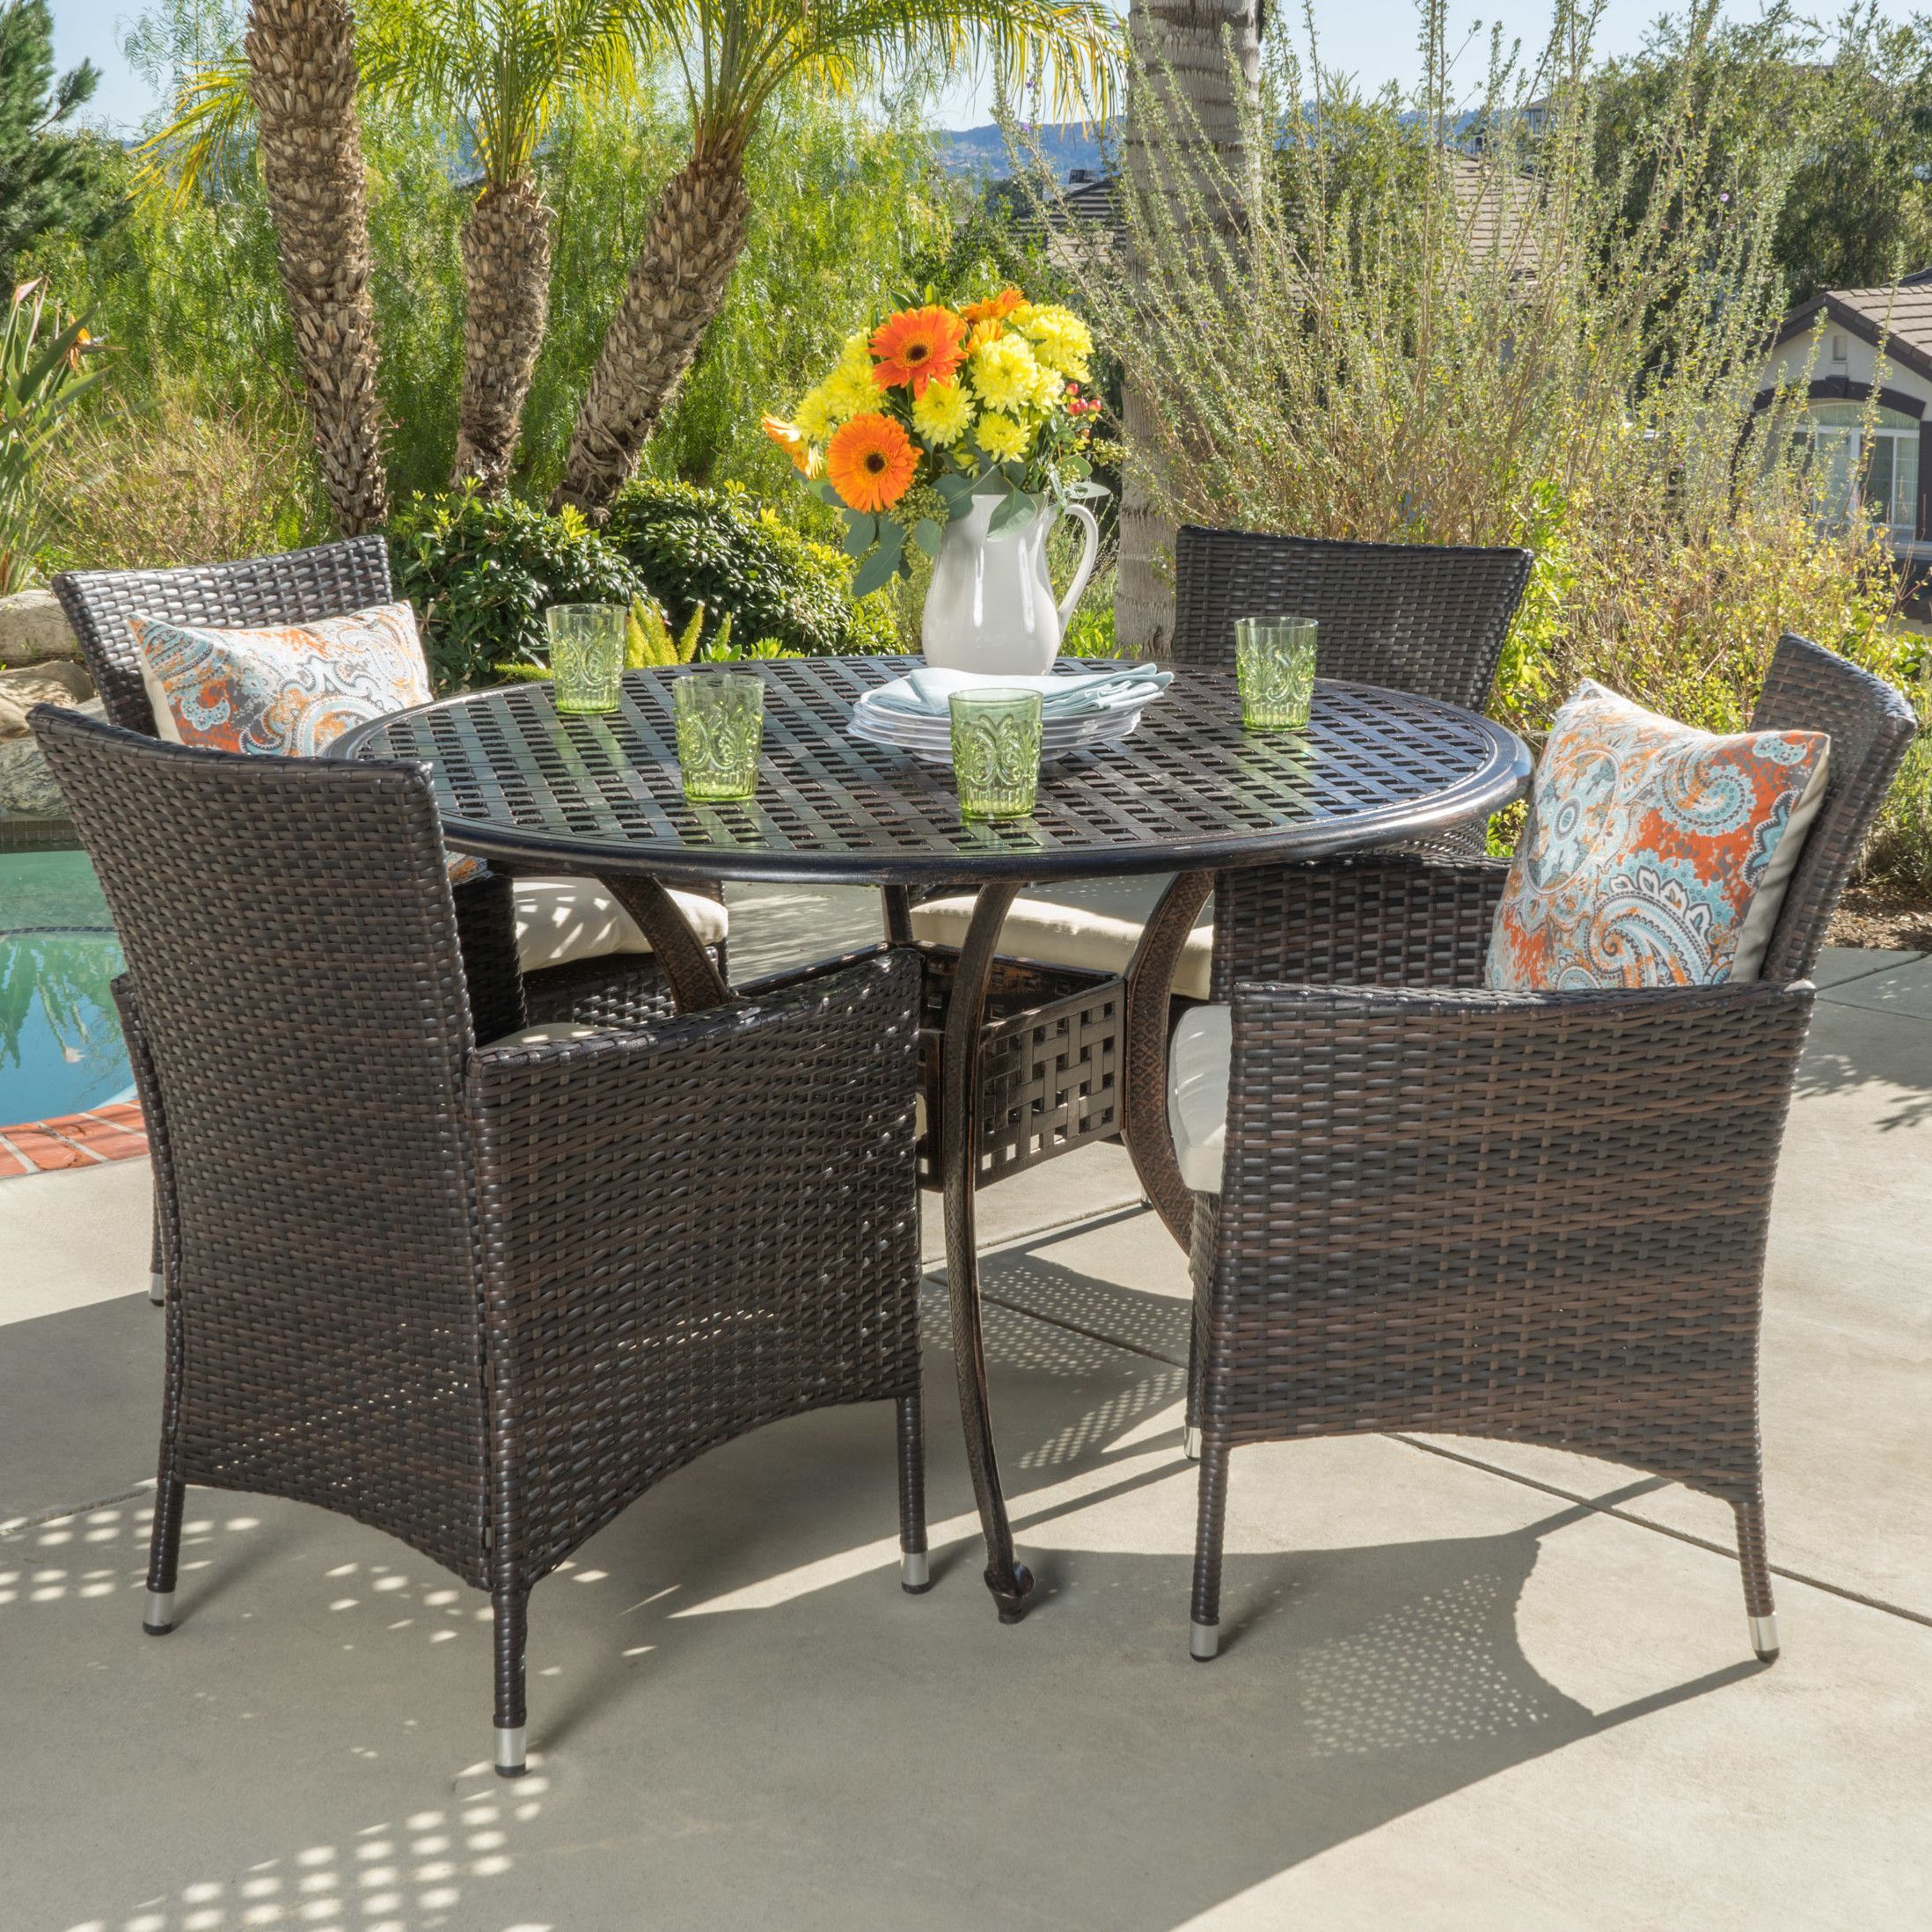 Bay Isle Home 5 Piece Vertura Patio Dining Set | Beautiful Outdoor For 5 Piece Outdoor Seating Patio Sets (View 1 of 15)